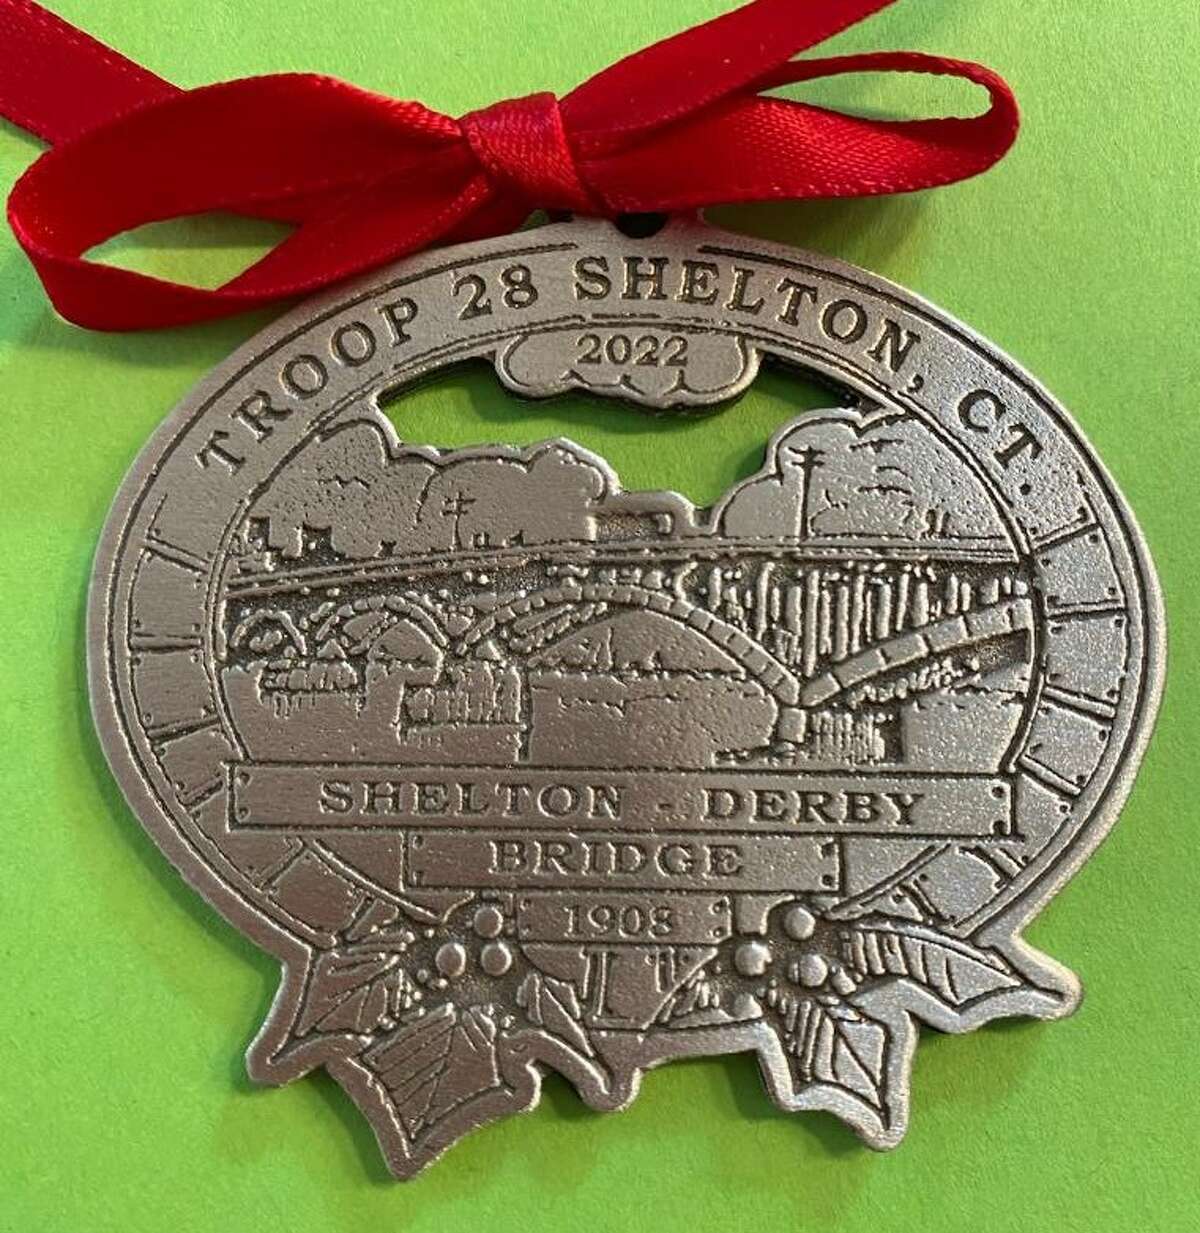 Shelton Scout Troop 28 has unveiled its 2022 Christmas ornament, which will be available for purchase at various schools on Election Day, Nov. 8, 2022.